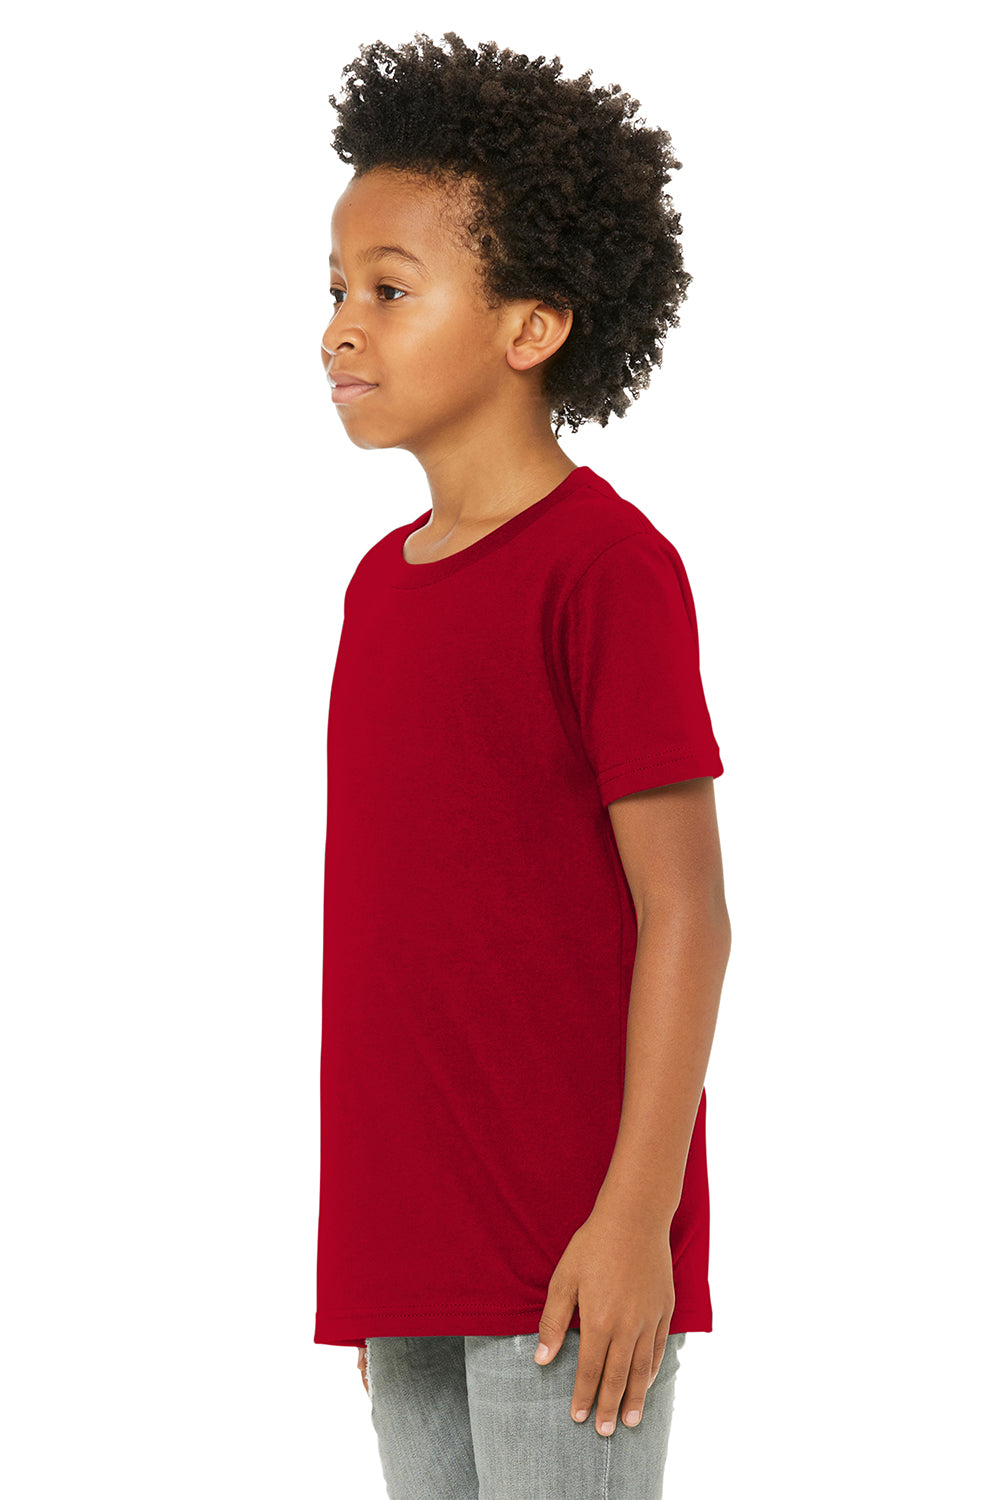 Bella + Canvas 3001Y Youth Jersey Short Sleeve Crewneck T-Shirt Red Model Side